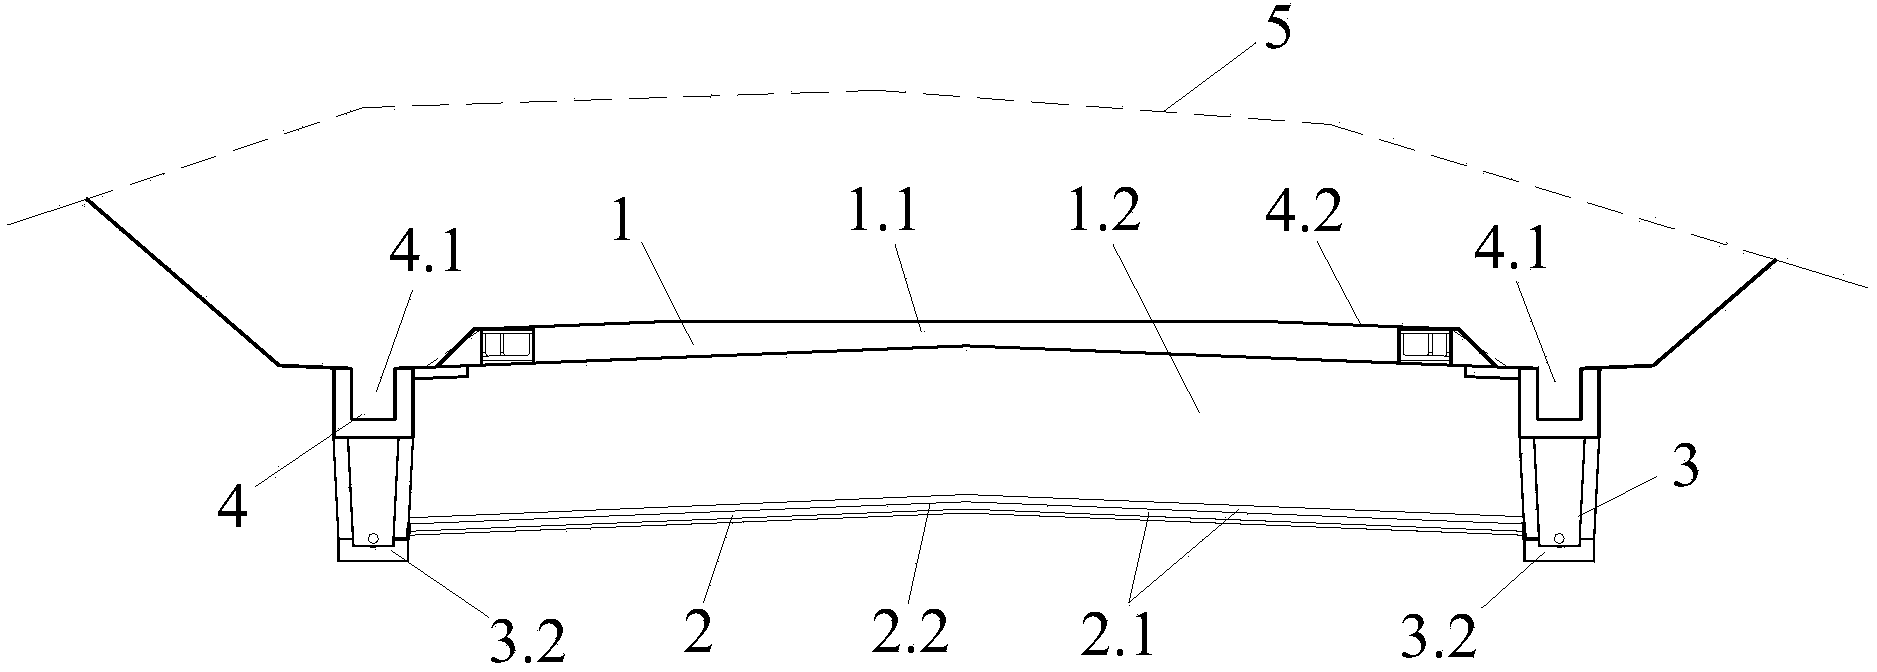 High-speed railway subgrade structure for saline soil areas